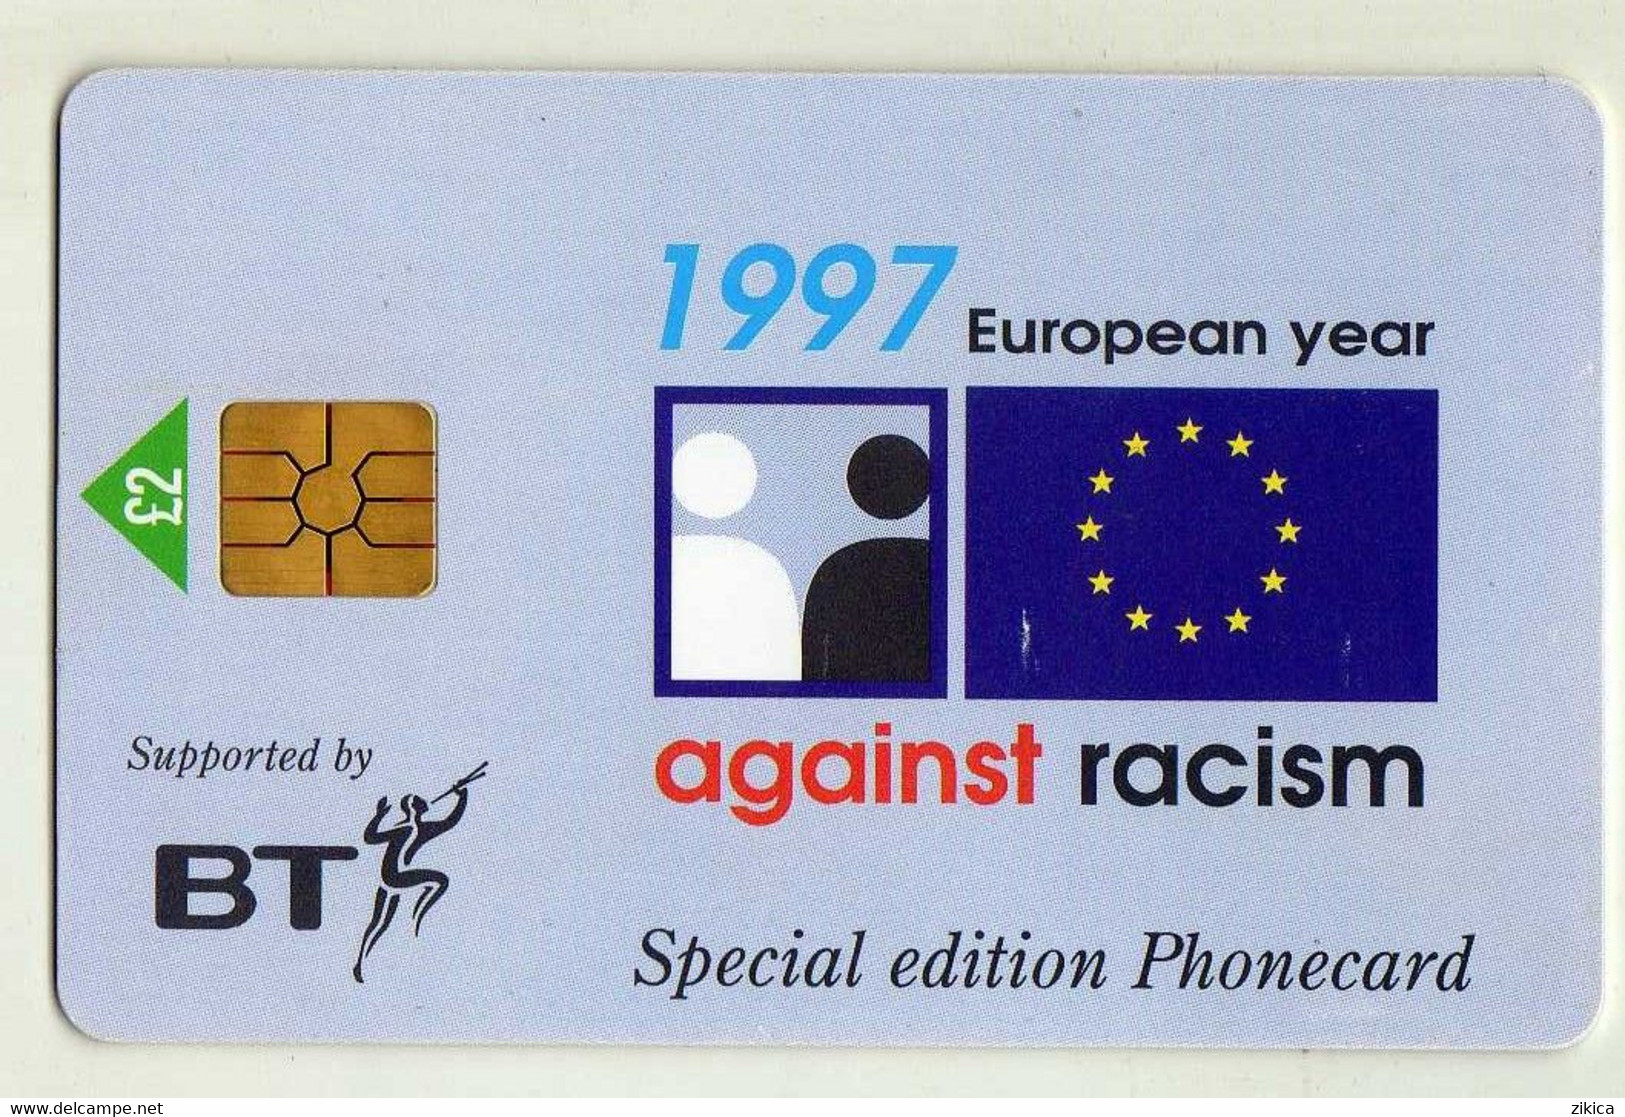 Phonecard - United Kingdom - BT - British Telecom - Special Edition - 1997 European Year - Against Racism - Other & Unclassified